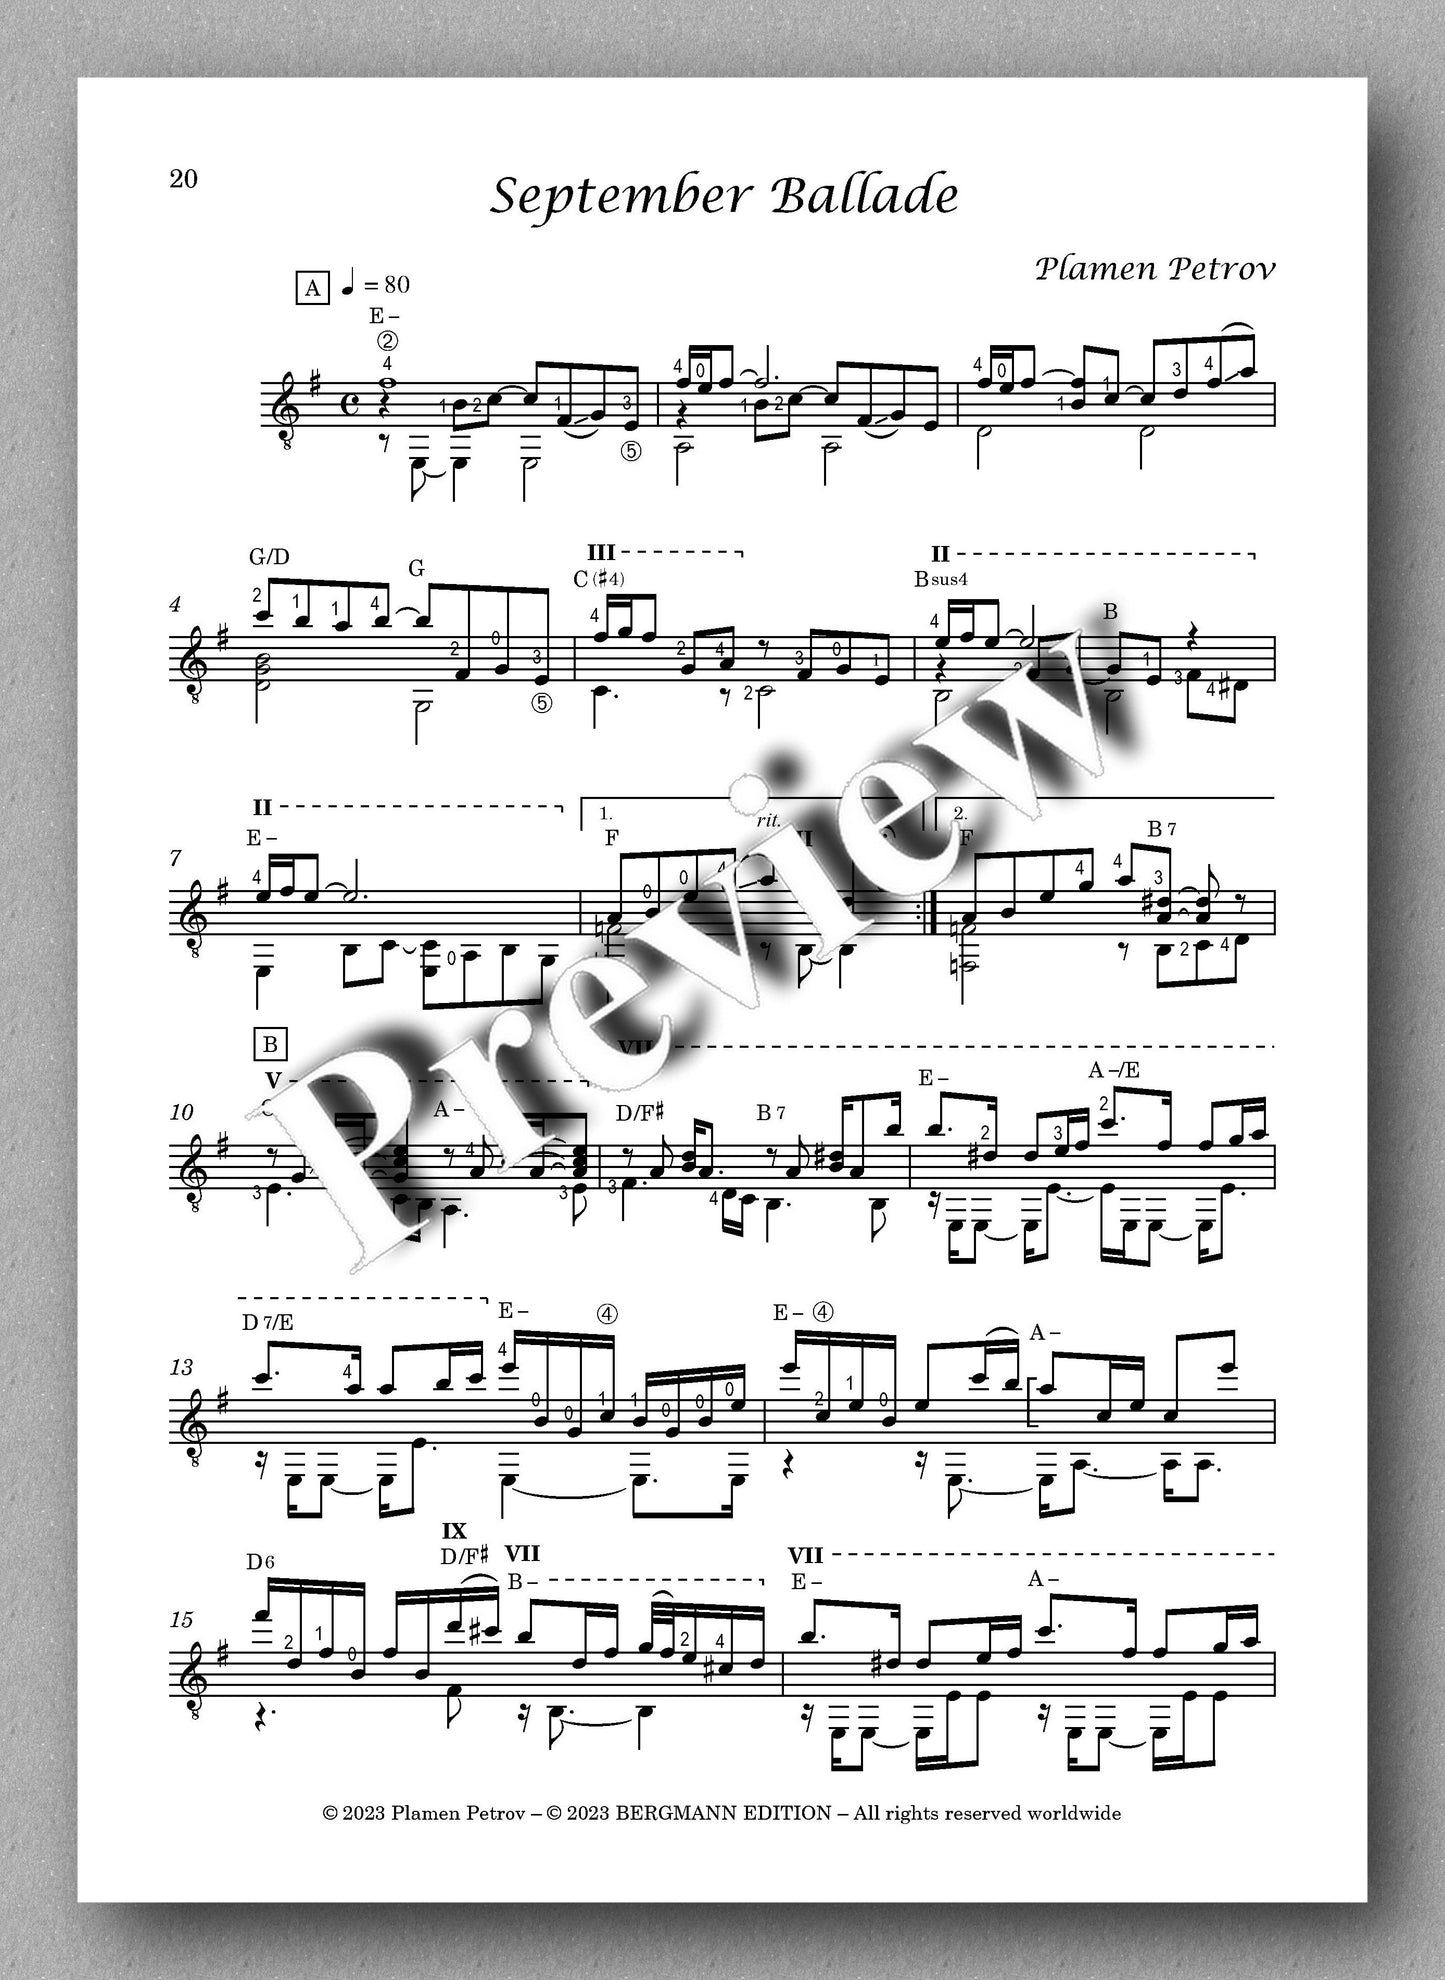 Wind Waltz by Plamen Petrov - preview of the music score 5